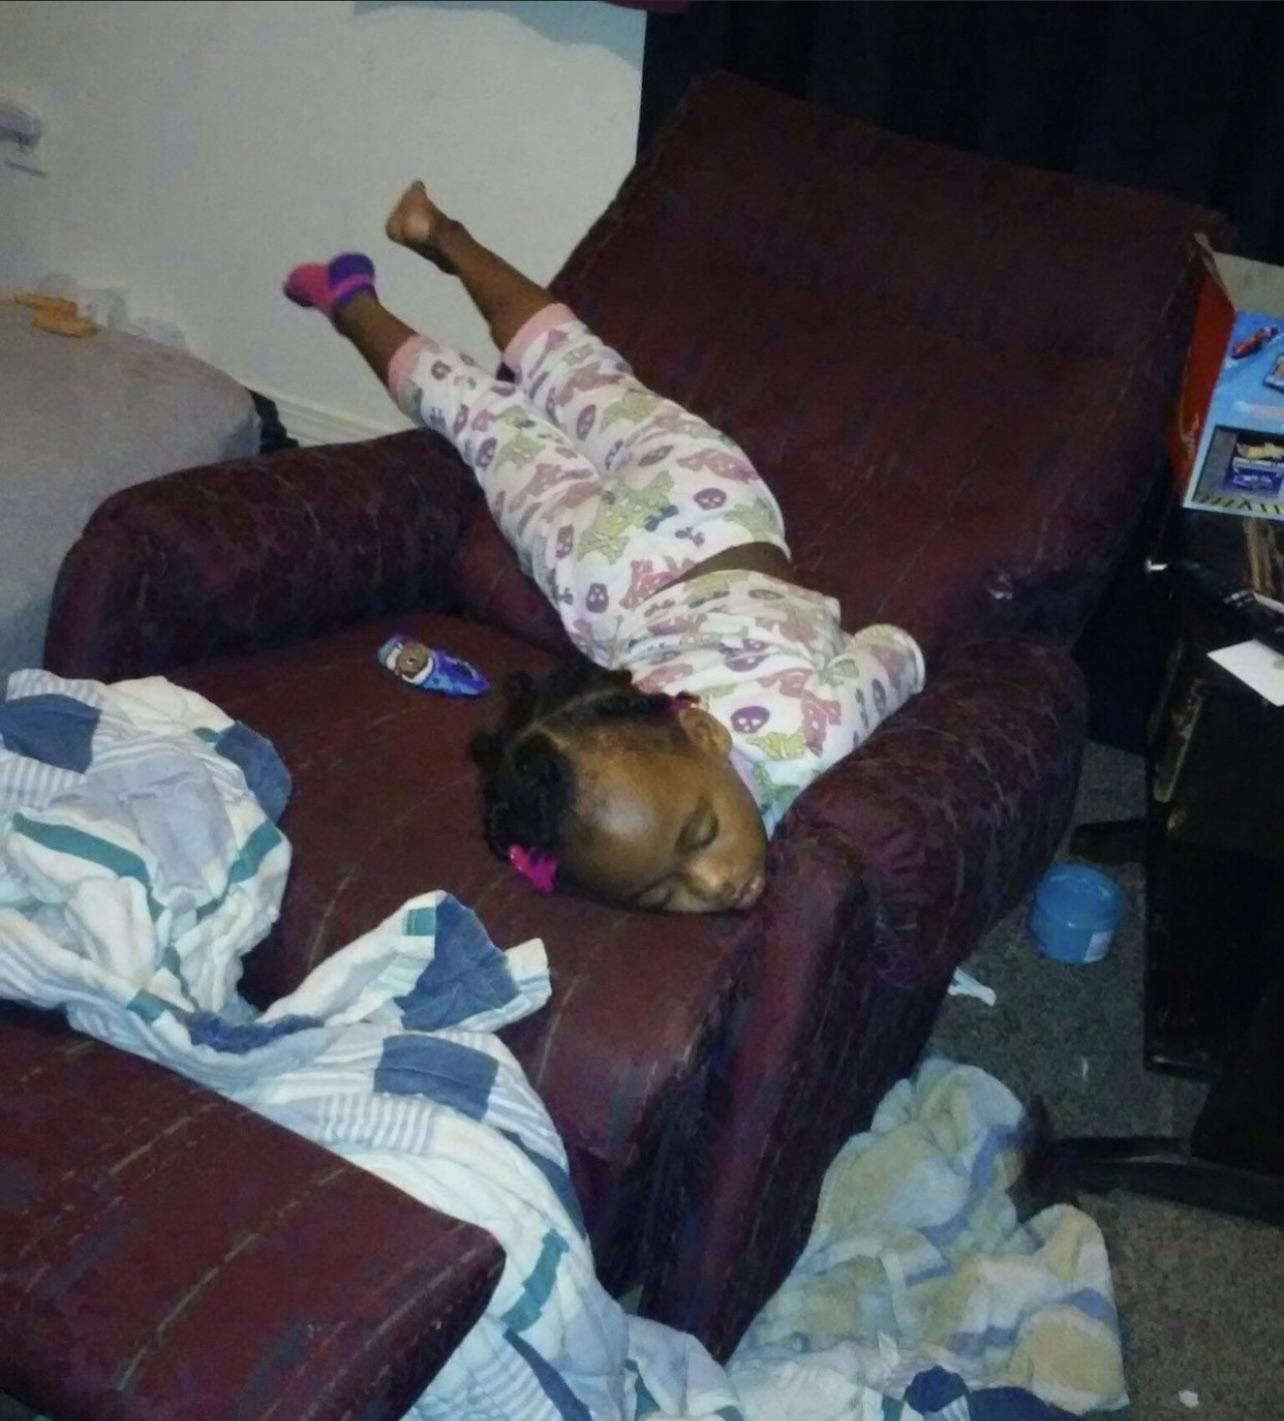 Old photo of my daughter lol. I got home from work one night to find her like this. I miss being a kid lol my back hurts looking at this lol.